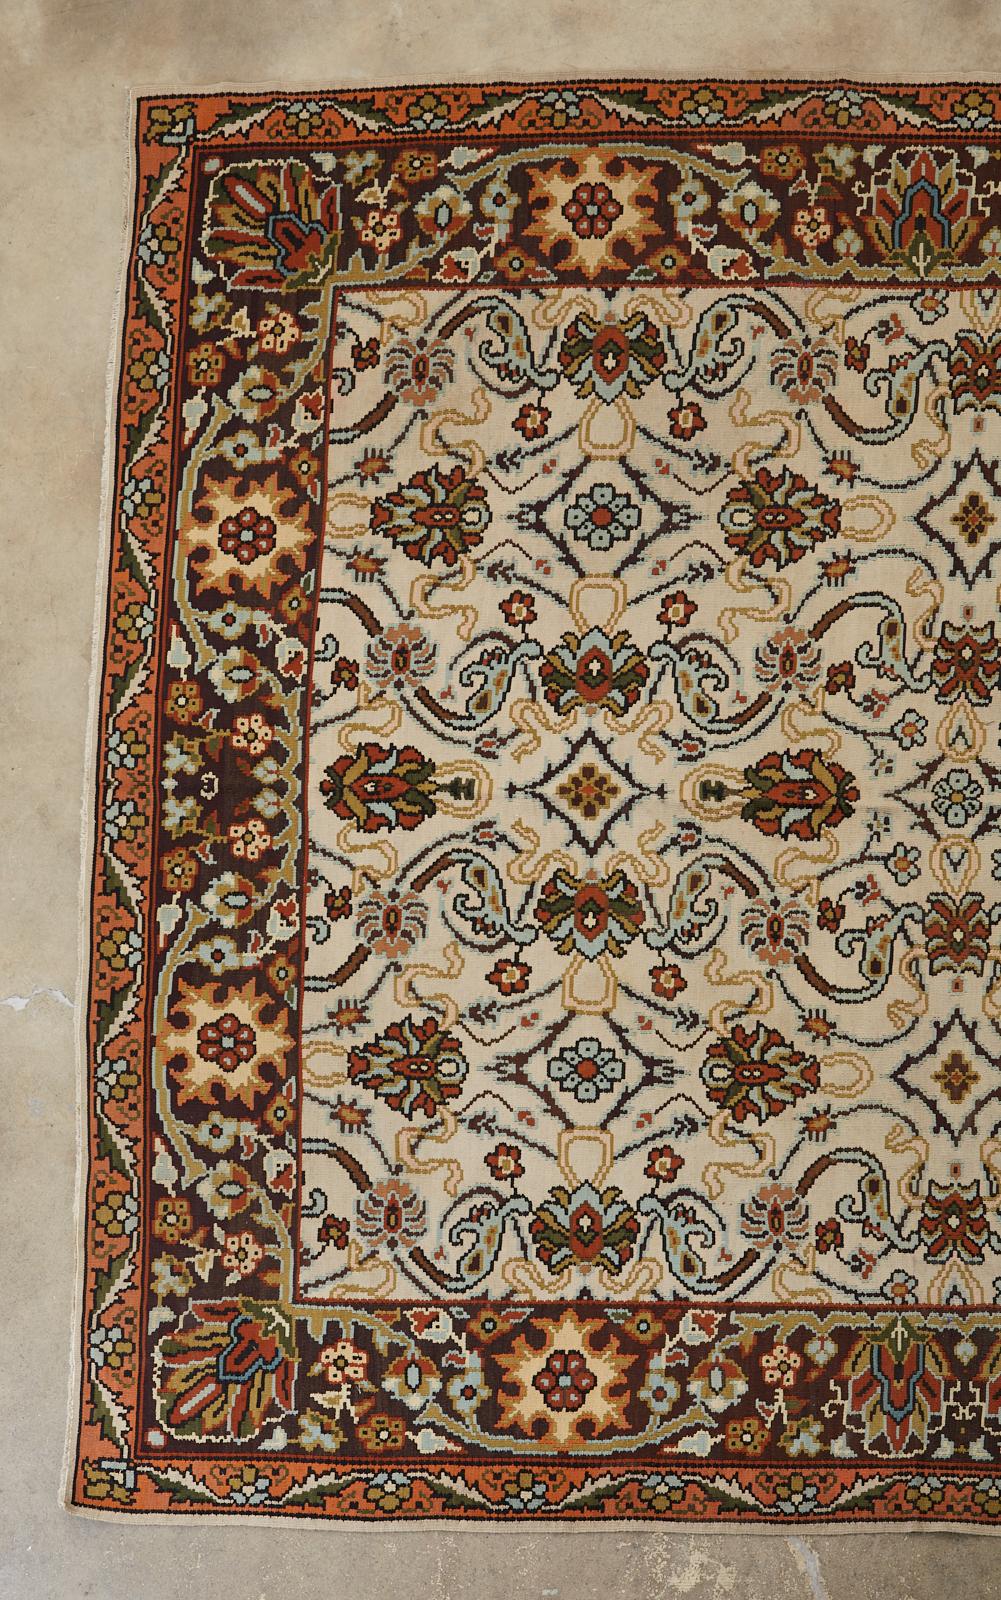 Large Mid-Century Modern Turkish flat-weave Thracian Kilim featuring an arts and crafts style floral decoration. The richly colored stylized flowers stand out prominent by against the khaki field. Beautifully woven with pale blue and green accents.